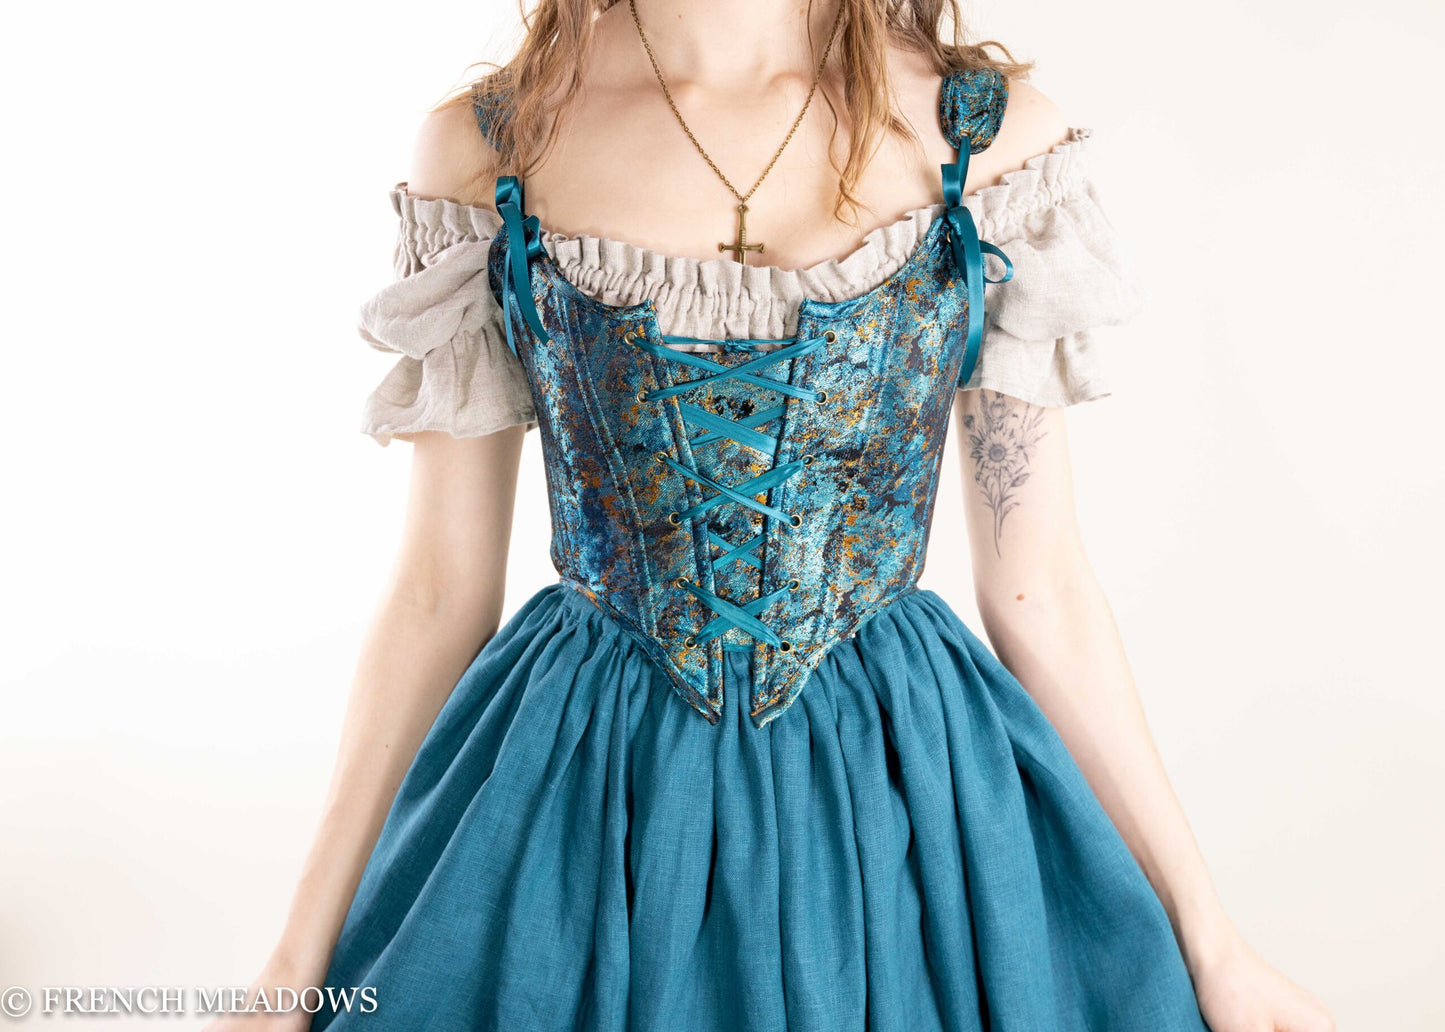 Teal and Metallic Gold Renaissance Bodice – French Meadows